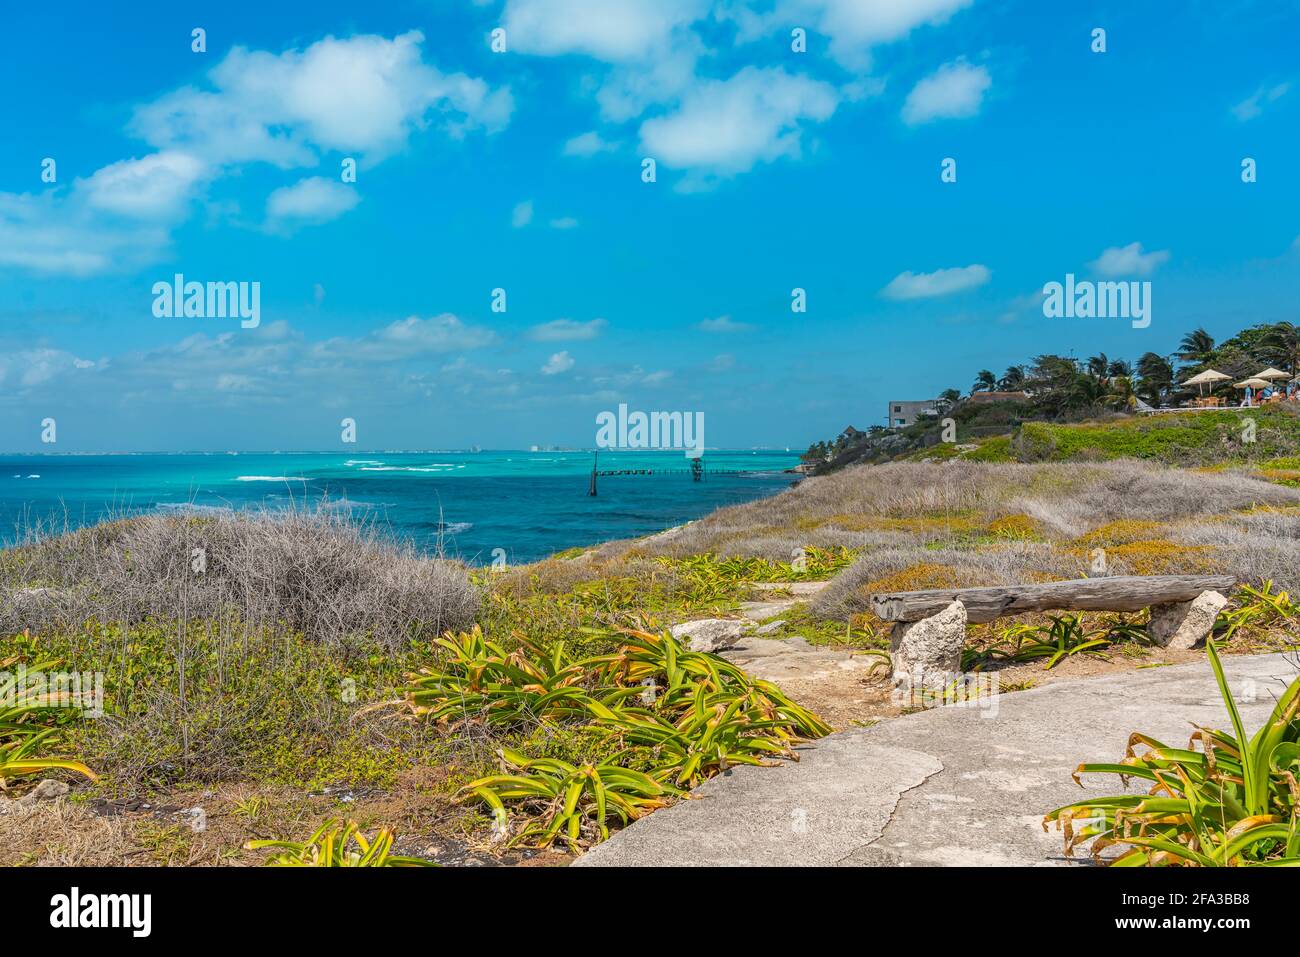 Isla Mujeres South Point Punta Sur Cancun Mexico Island turquoise water and walking way, background blue sky Stock Photo